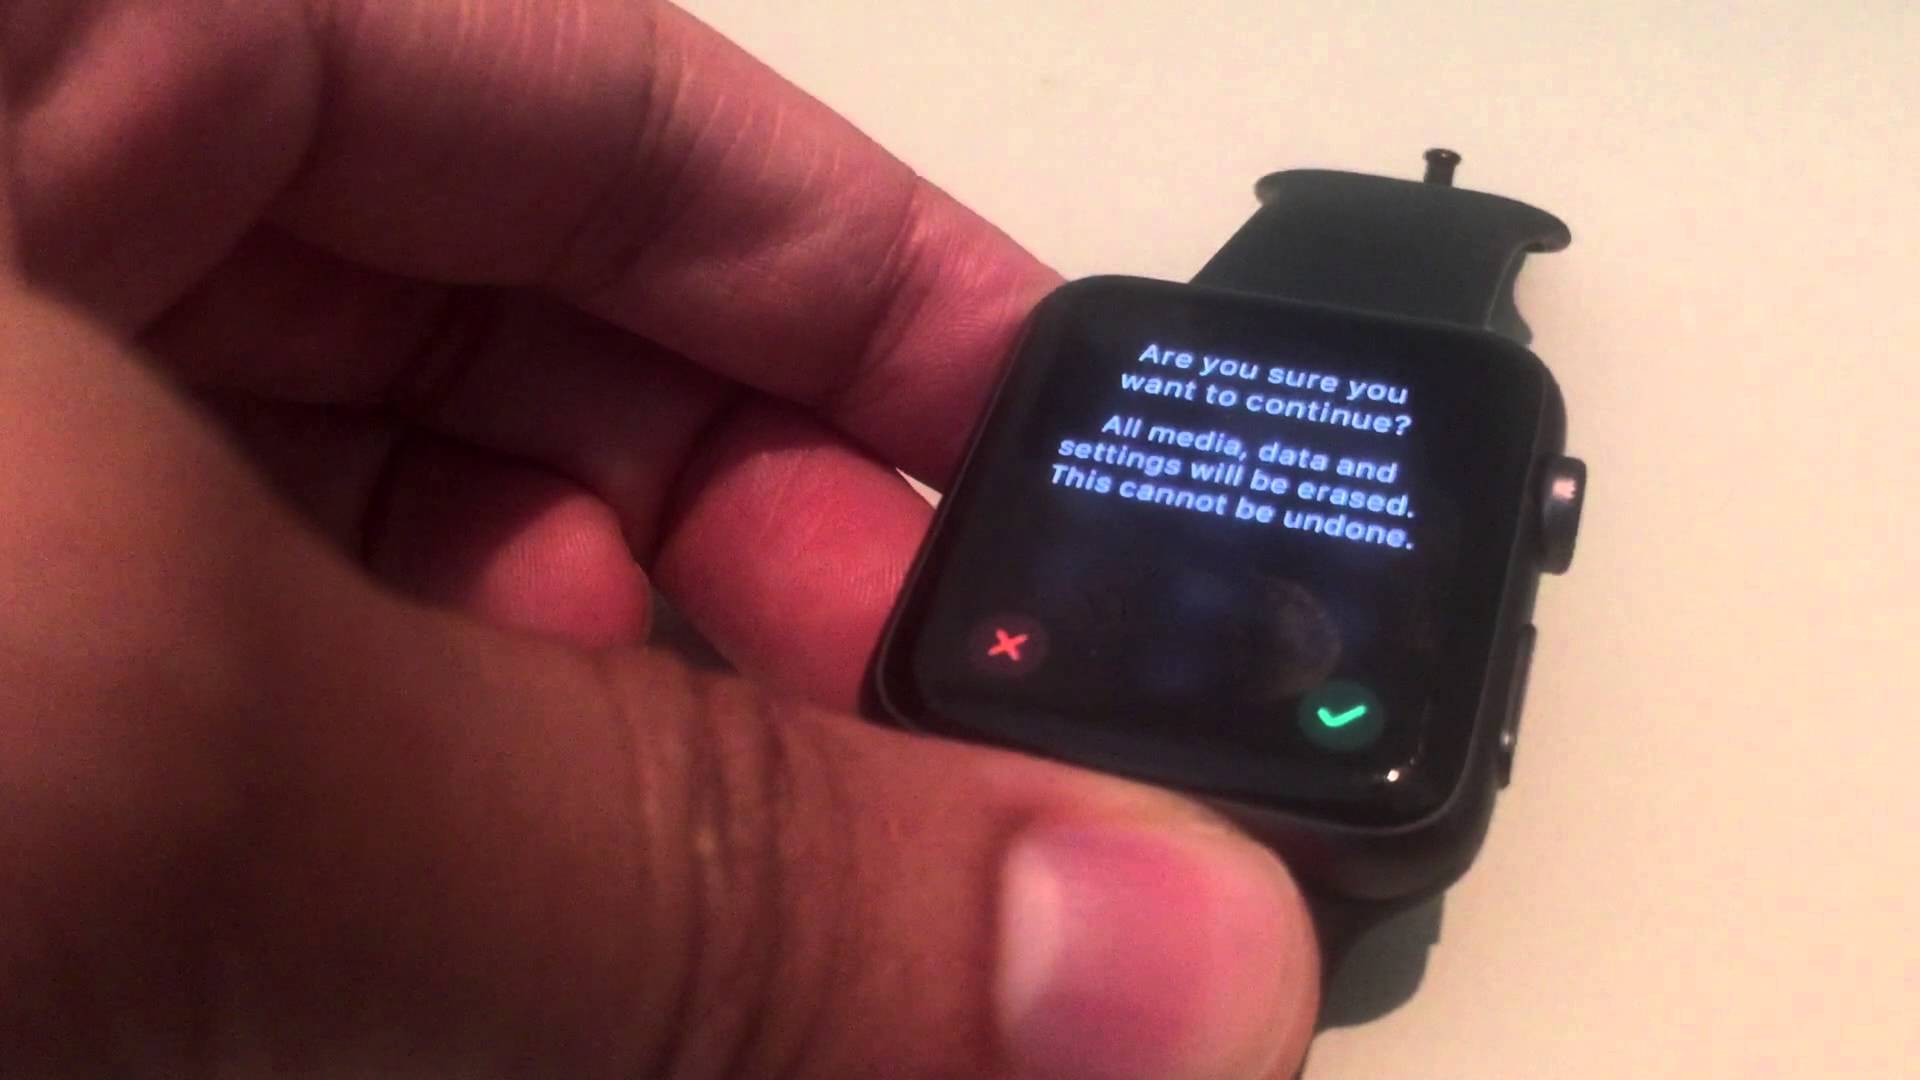 Watch OS 1.0 Lacks Necessary Security Features To Deter Thieves